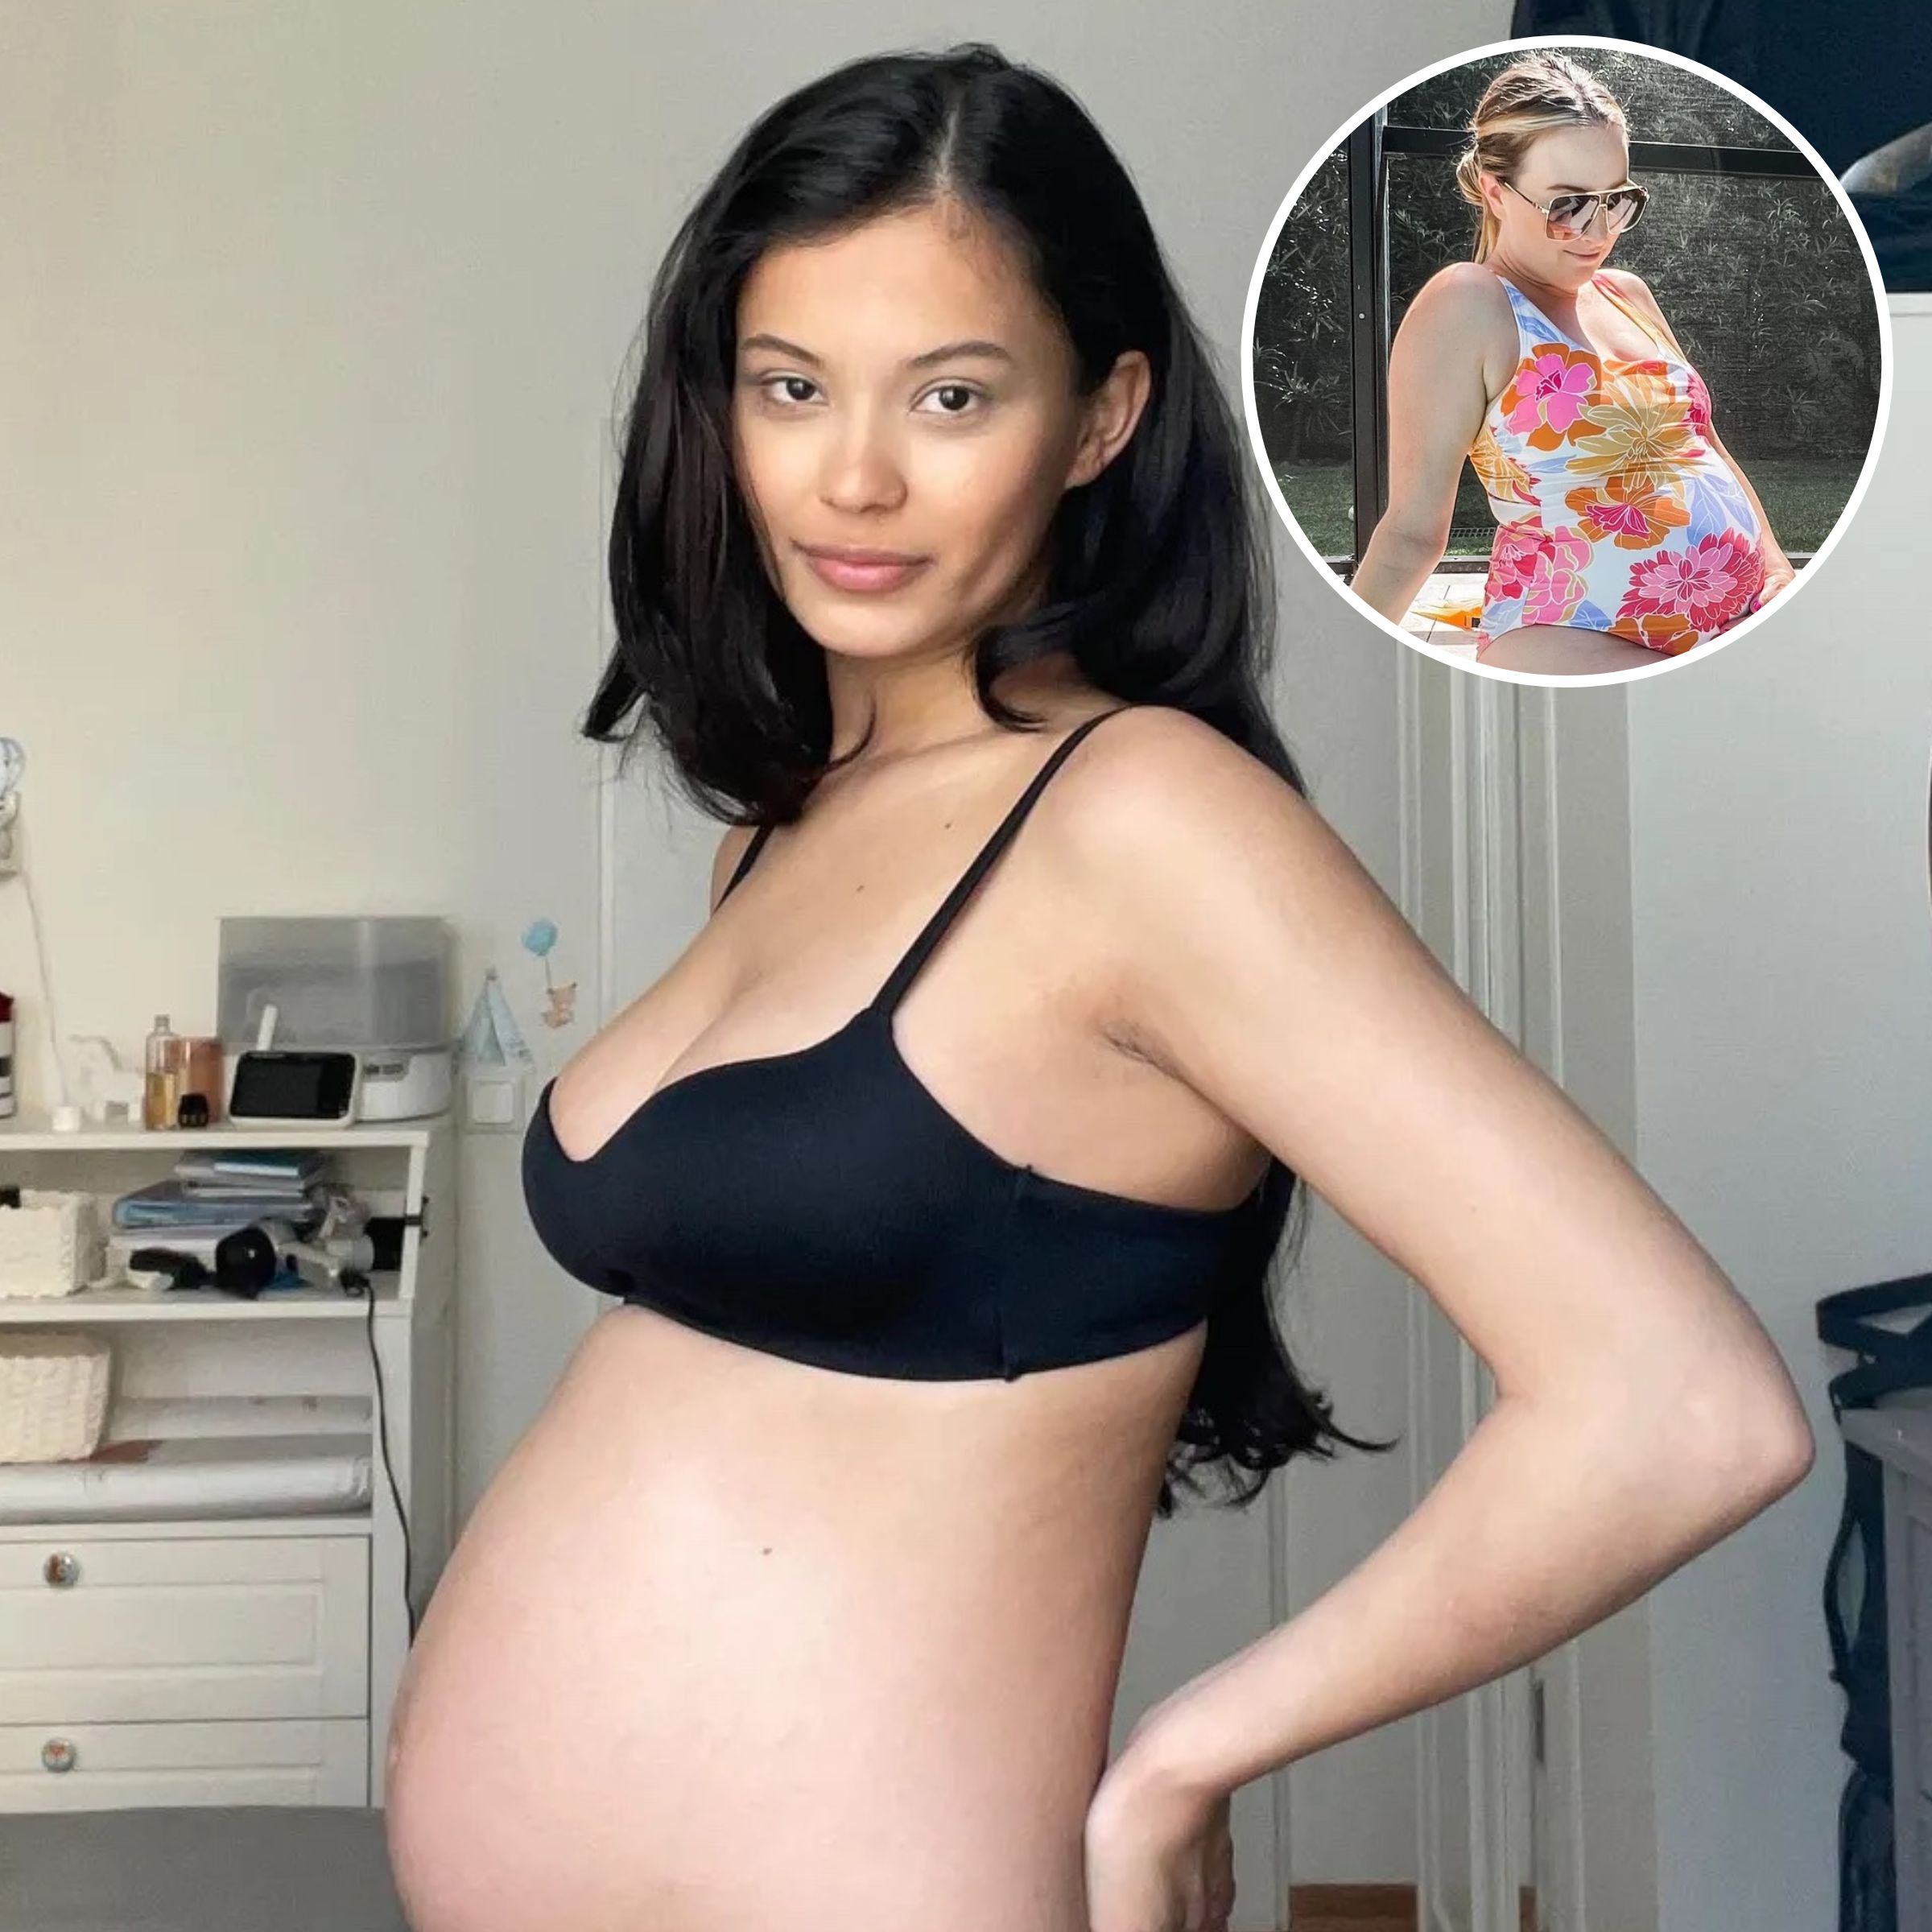 90 Day Fiance Baby Bumps See Pregnancy Photos pic